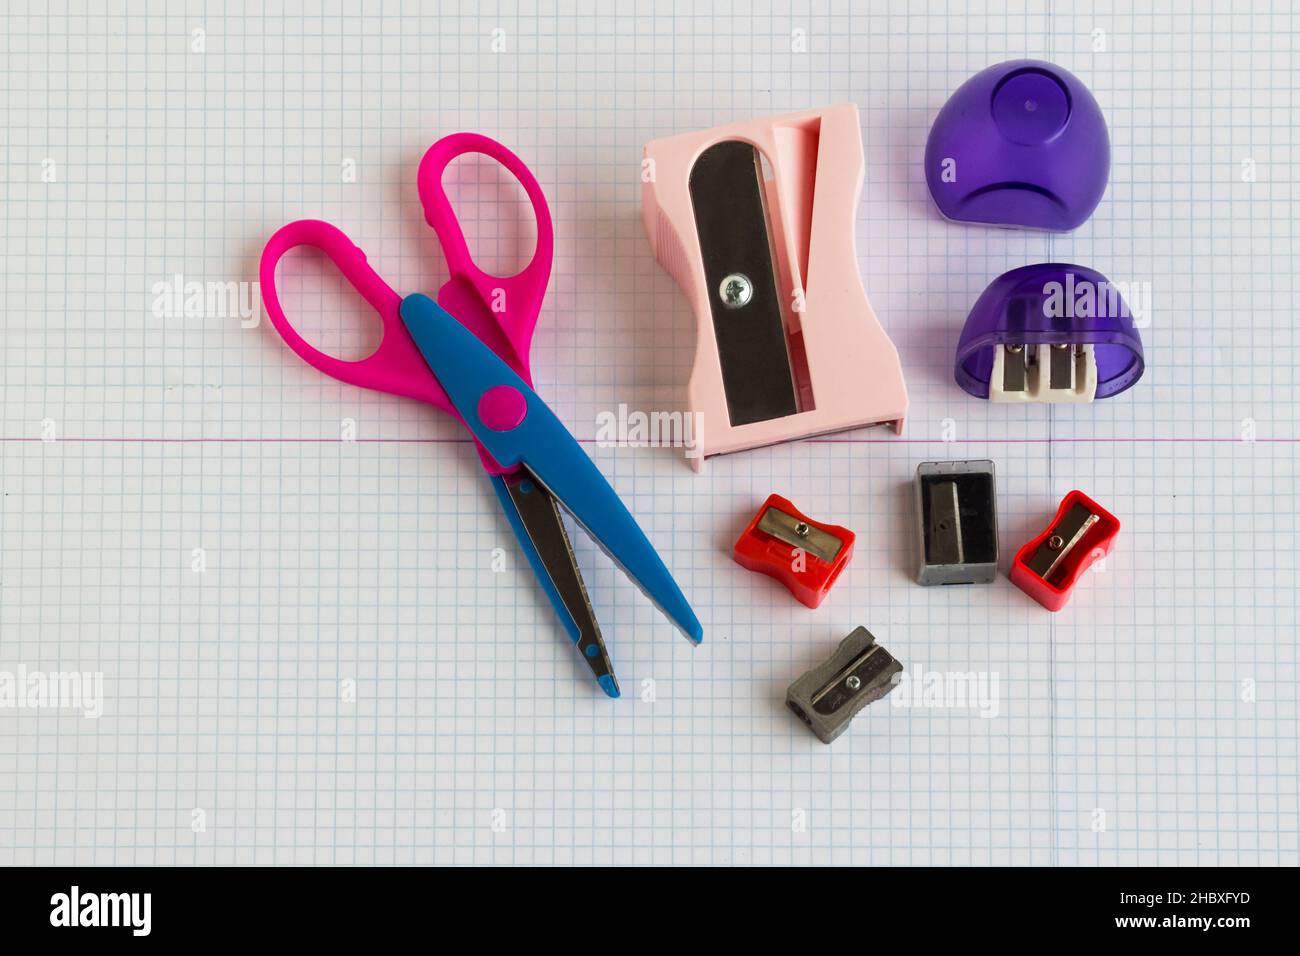 Assortment of sharpeners and a paper scissors on checkered paper Stock Photo